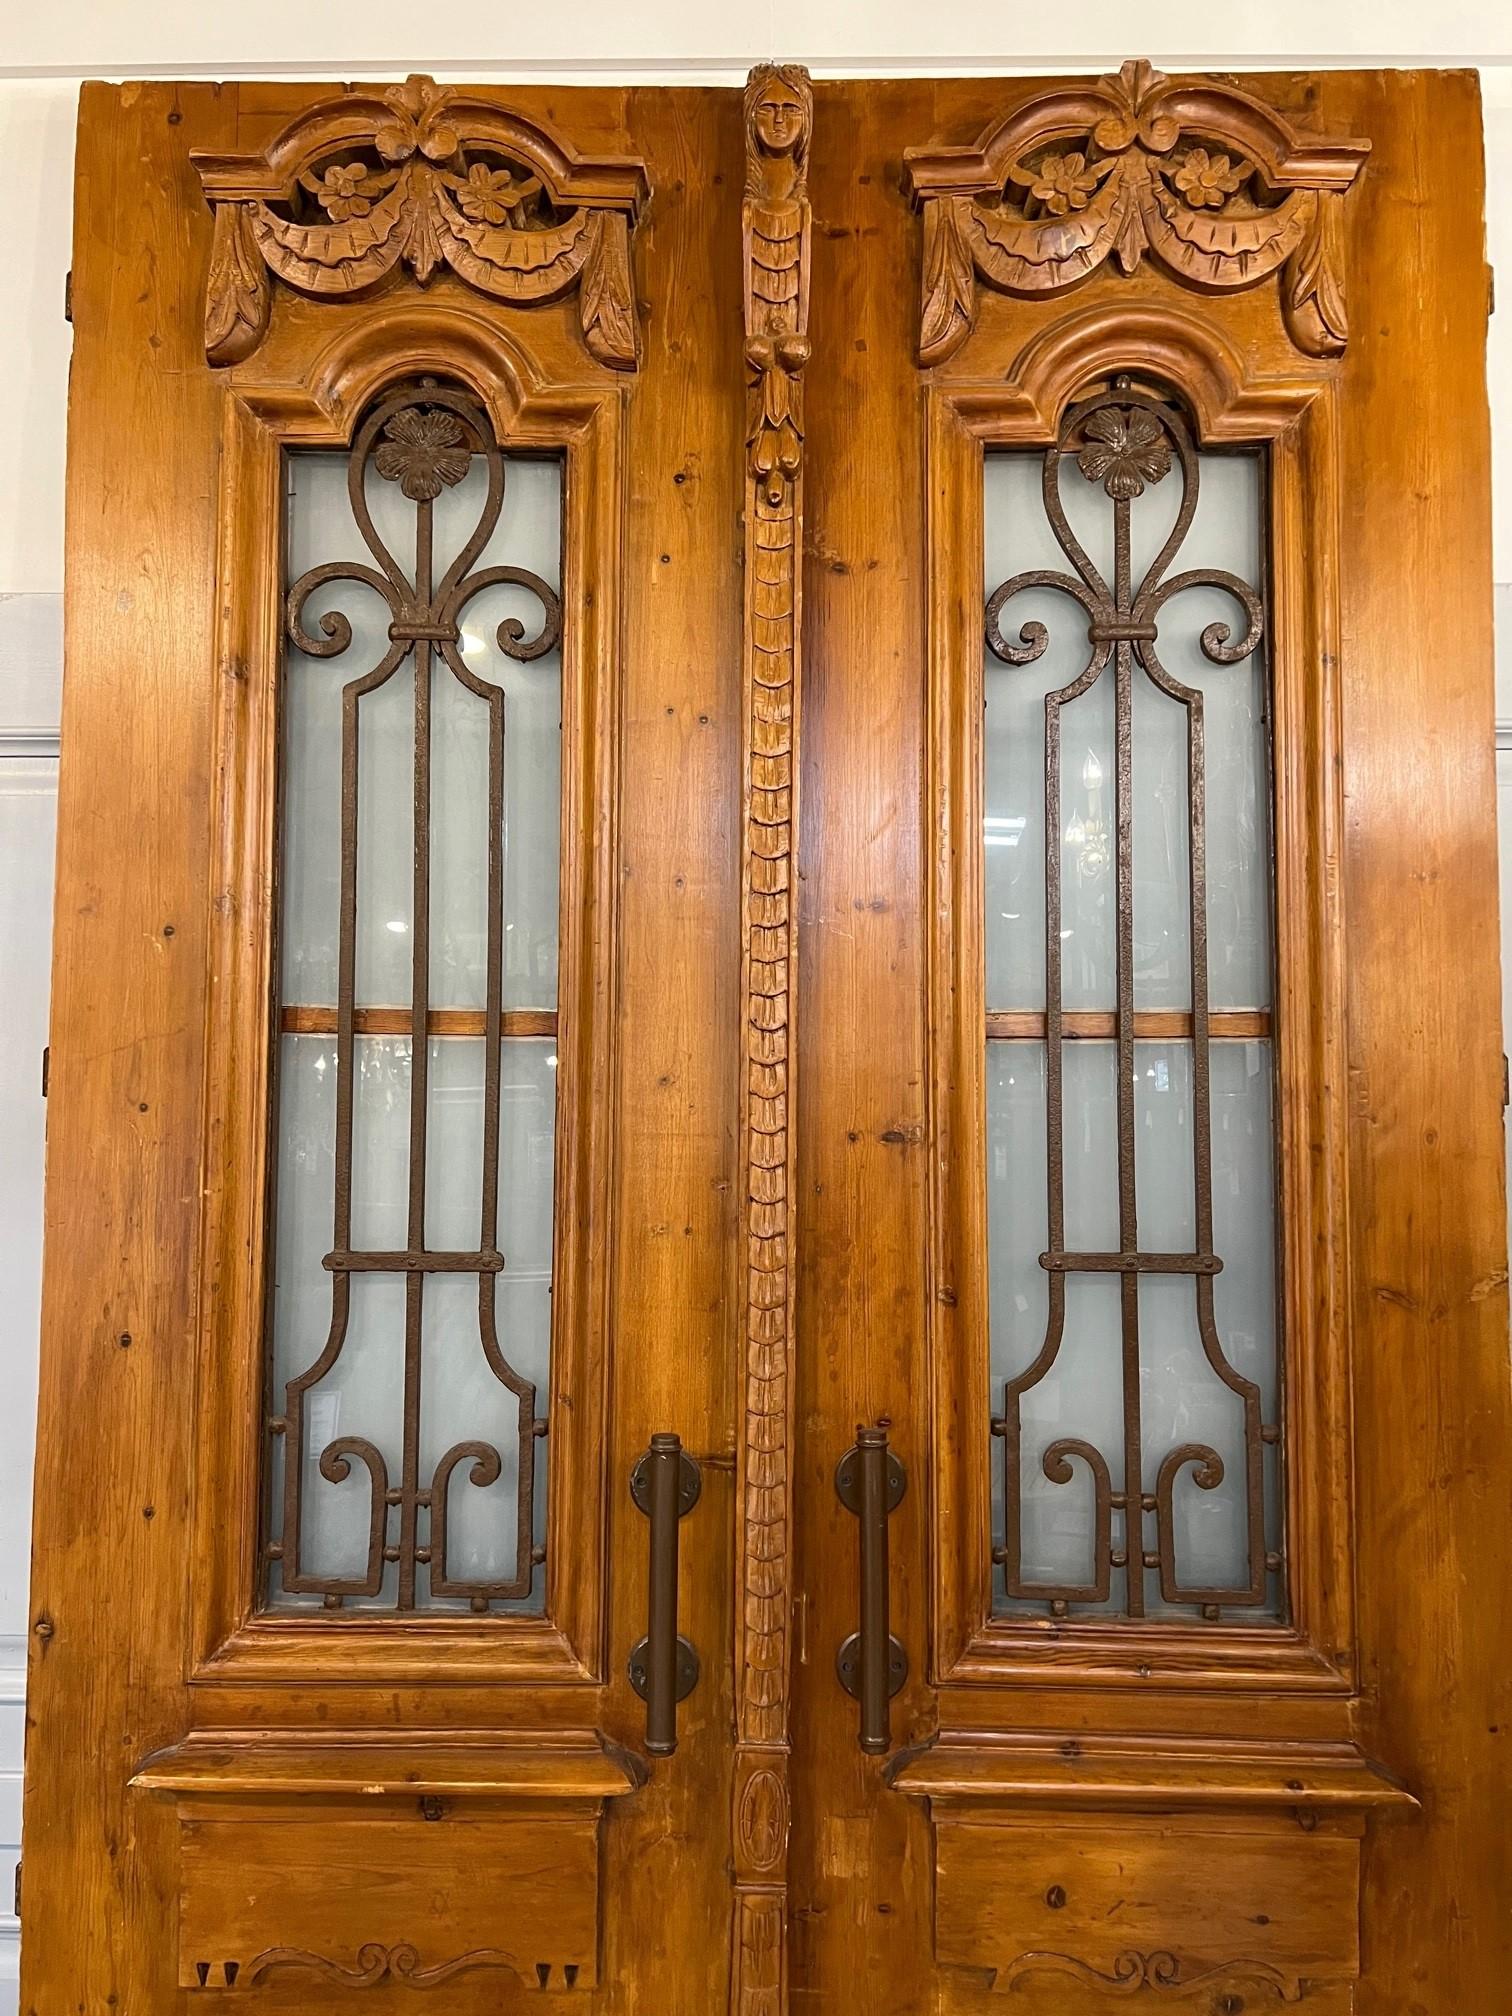 This pair of Egyptian doors were produced at a time when French architecture and style had a great influence on the Egyptian culture, especially in Cairo. They are a very impressive set of doors which would look great used both interior or exterior.